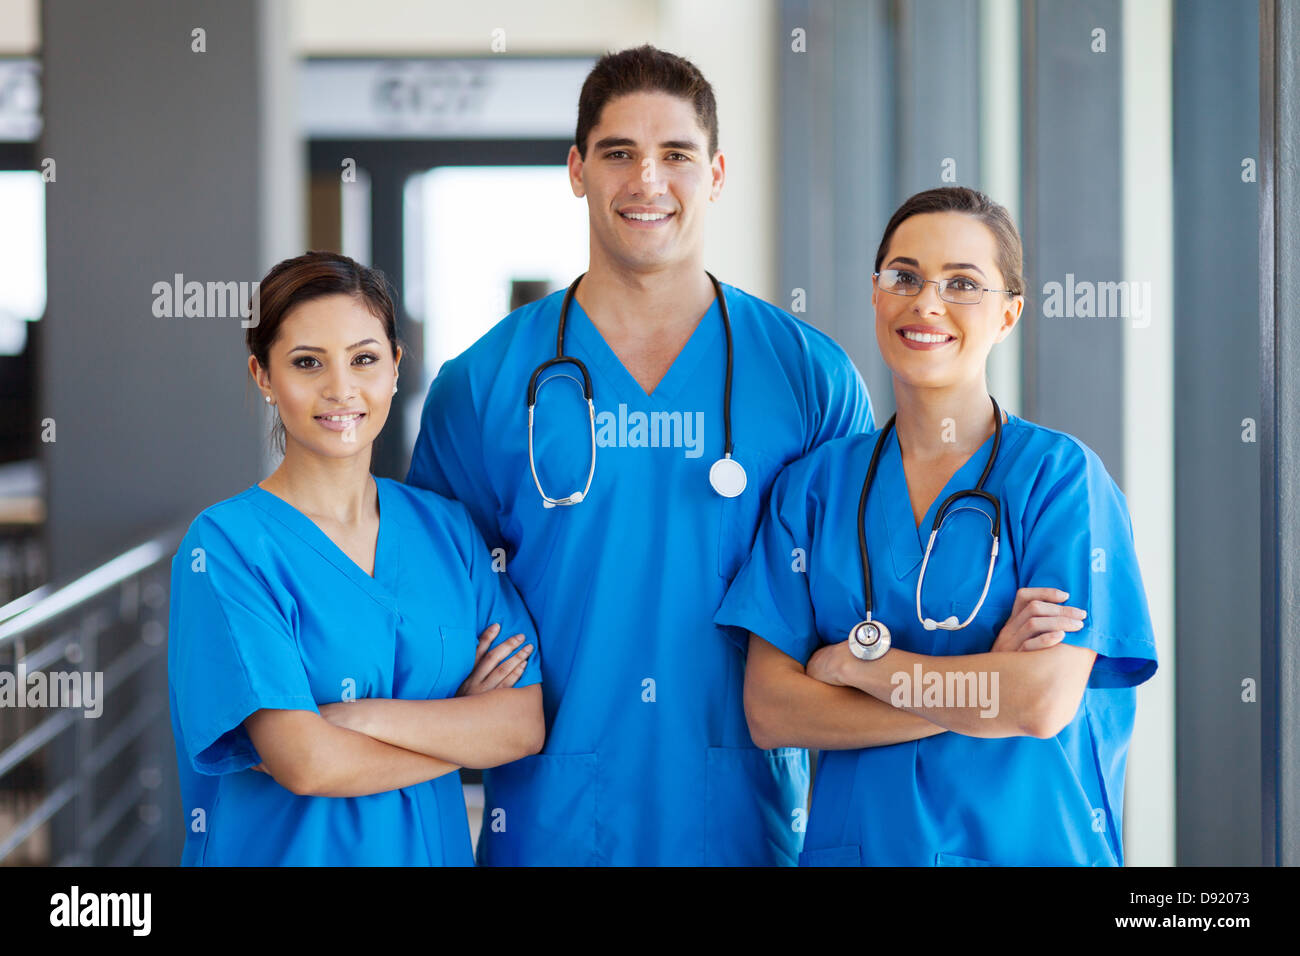 group of young hospital workers in scrubs Stock Photo